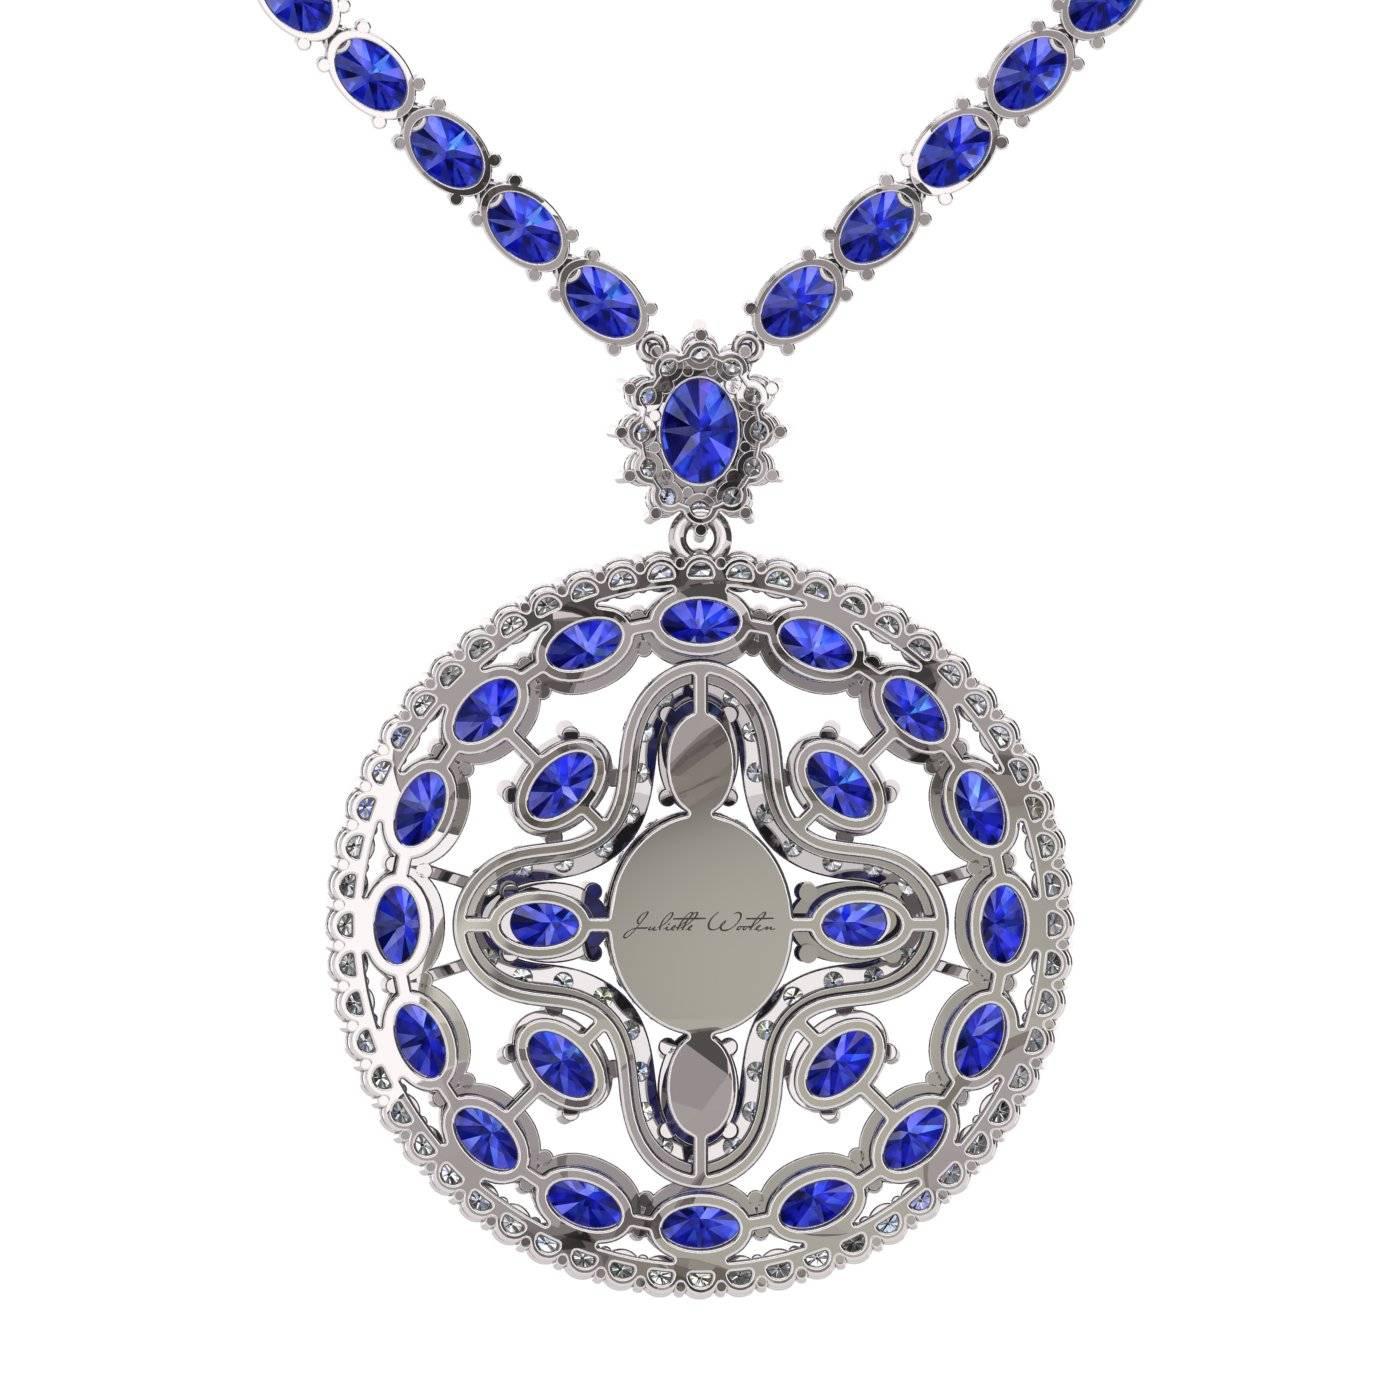 INTRODUCING NEW COLLECTION LE CERCLE PARFAIT

The magnificent and holy blue sapphires. Captivating deep blue color is a color of wisdom and royalty. It is symbolizing power, prophecy and divinity. Discover the natural beauty of this mysterious